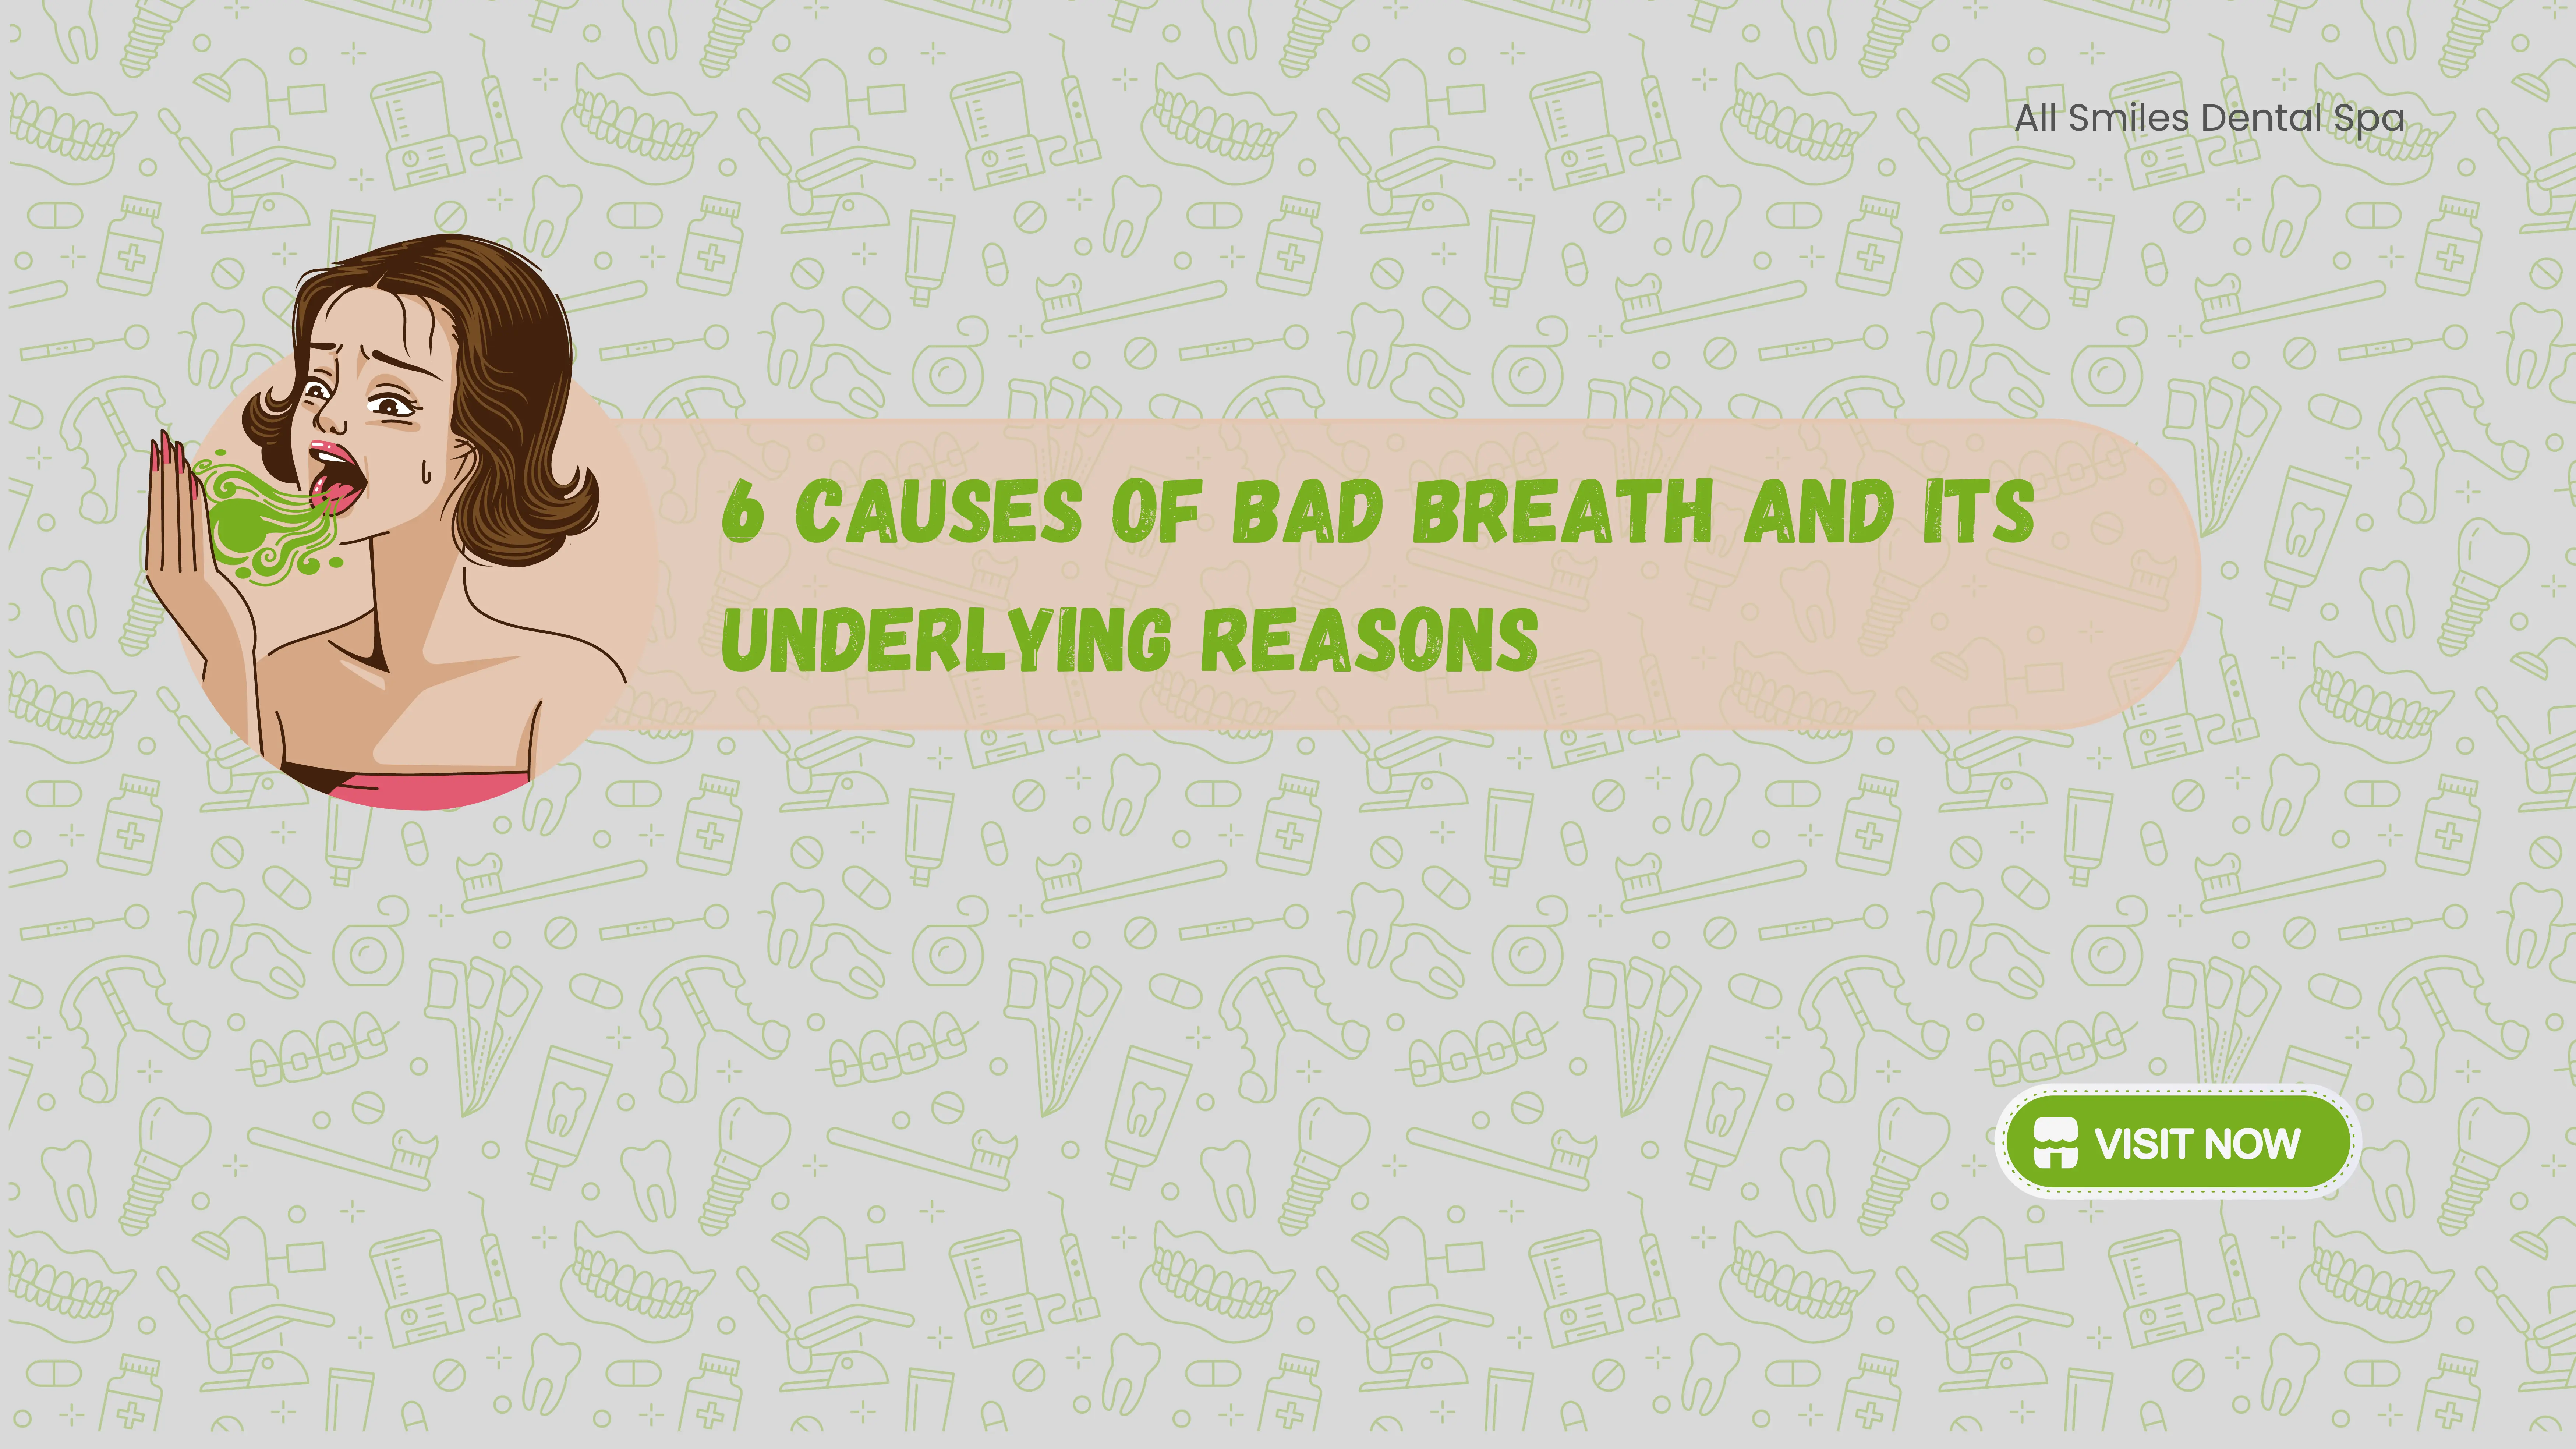 6 Causes of Bad Breath and Its Underlying Reasons